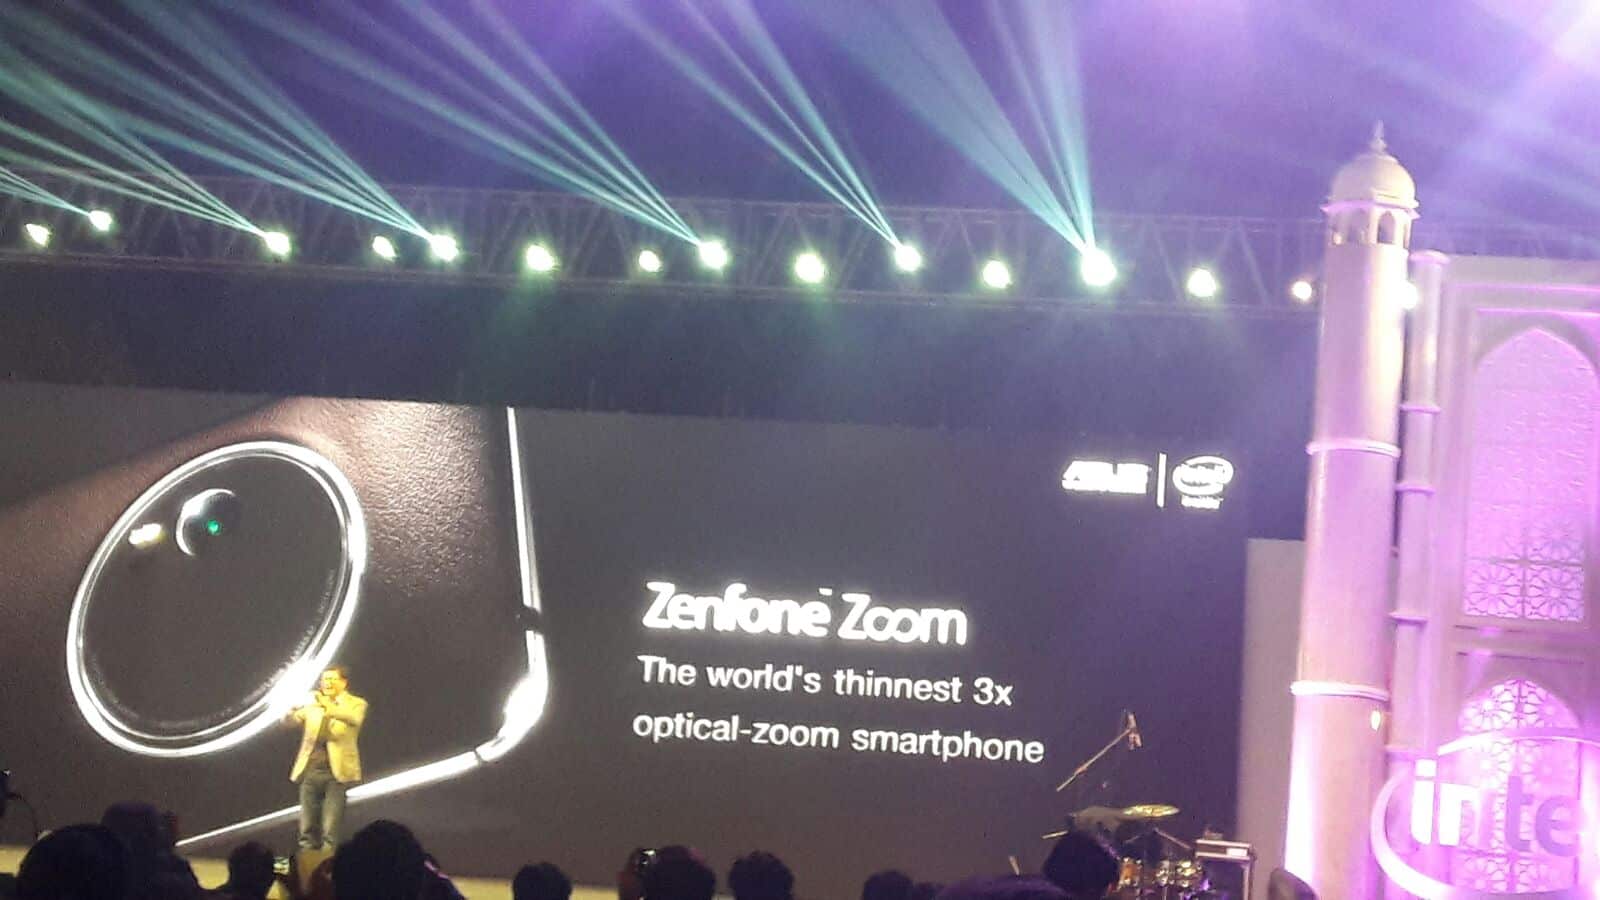 Asus ZenFone Zoom unveiled: This is the World's thinnest 3X Optical-Zoom smartphone - 18